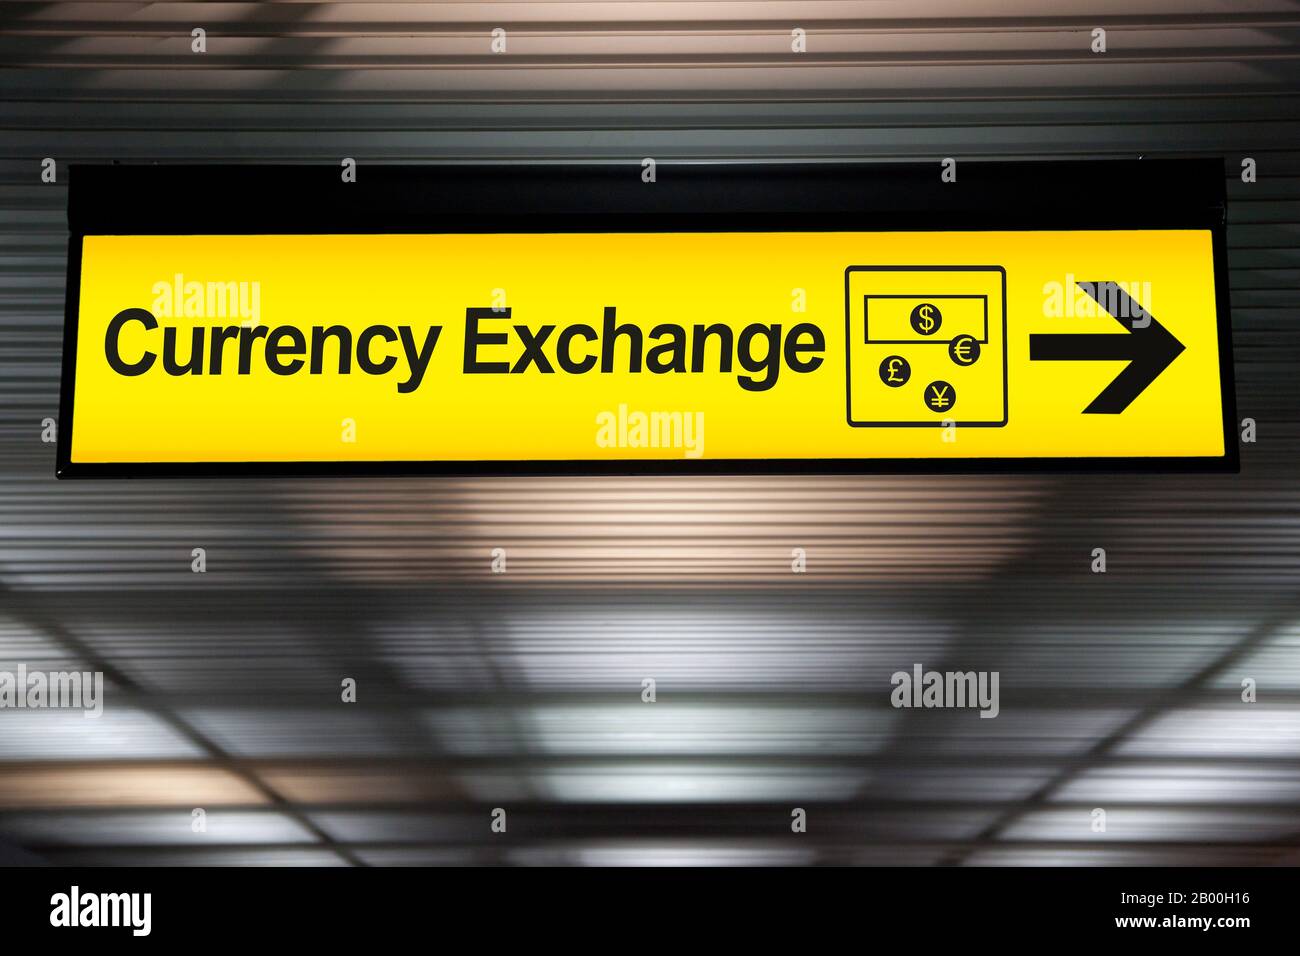 sign currency exchange at the airport with money currency icon and arrow for direction to currency exchange booth counter service for tourist Stock Photo